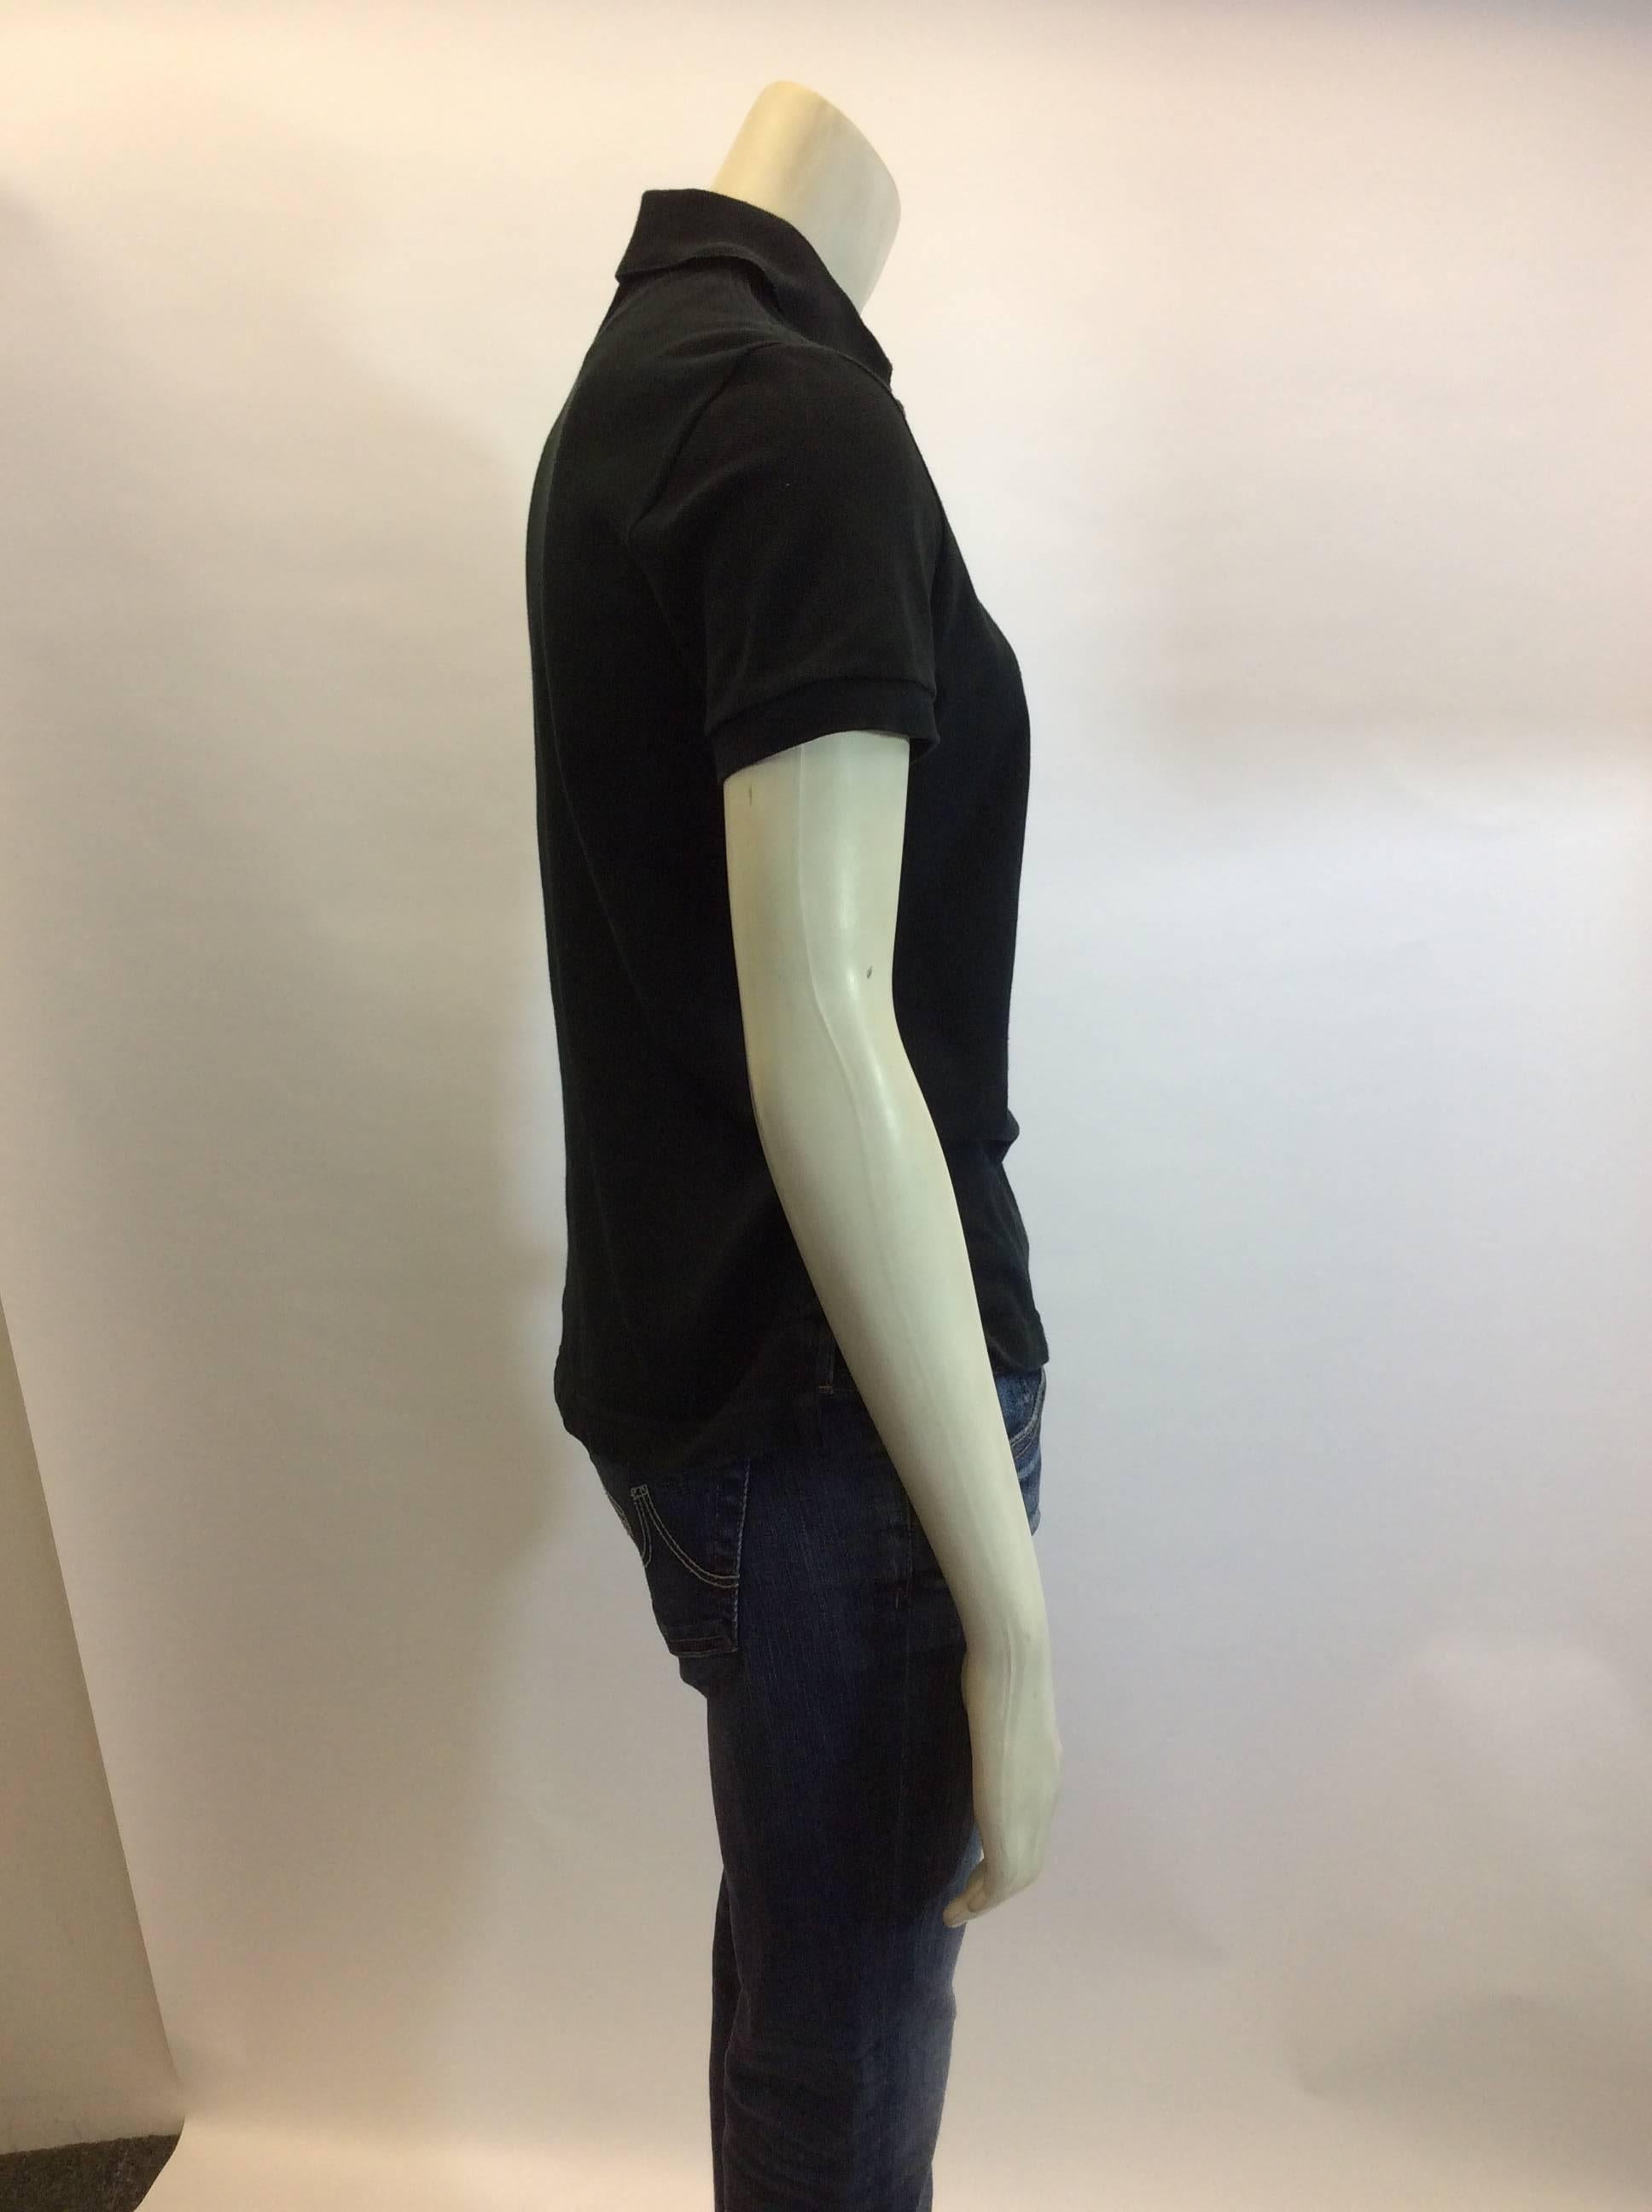 Hermes Black Cotton Polo
100% cotton
Made in Italy 
$108
Short sleeve